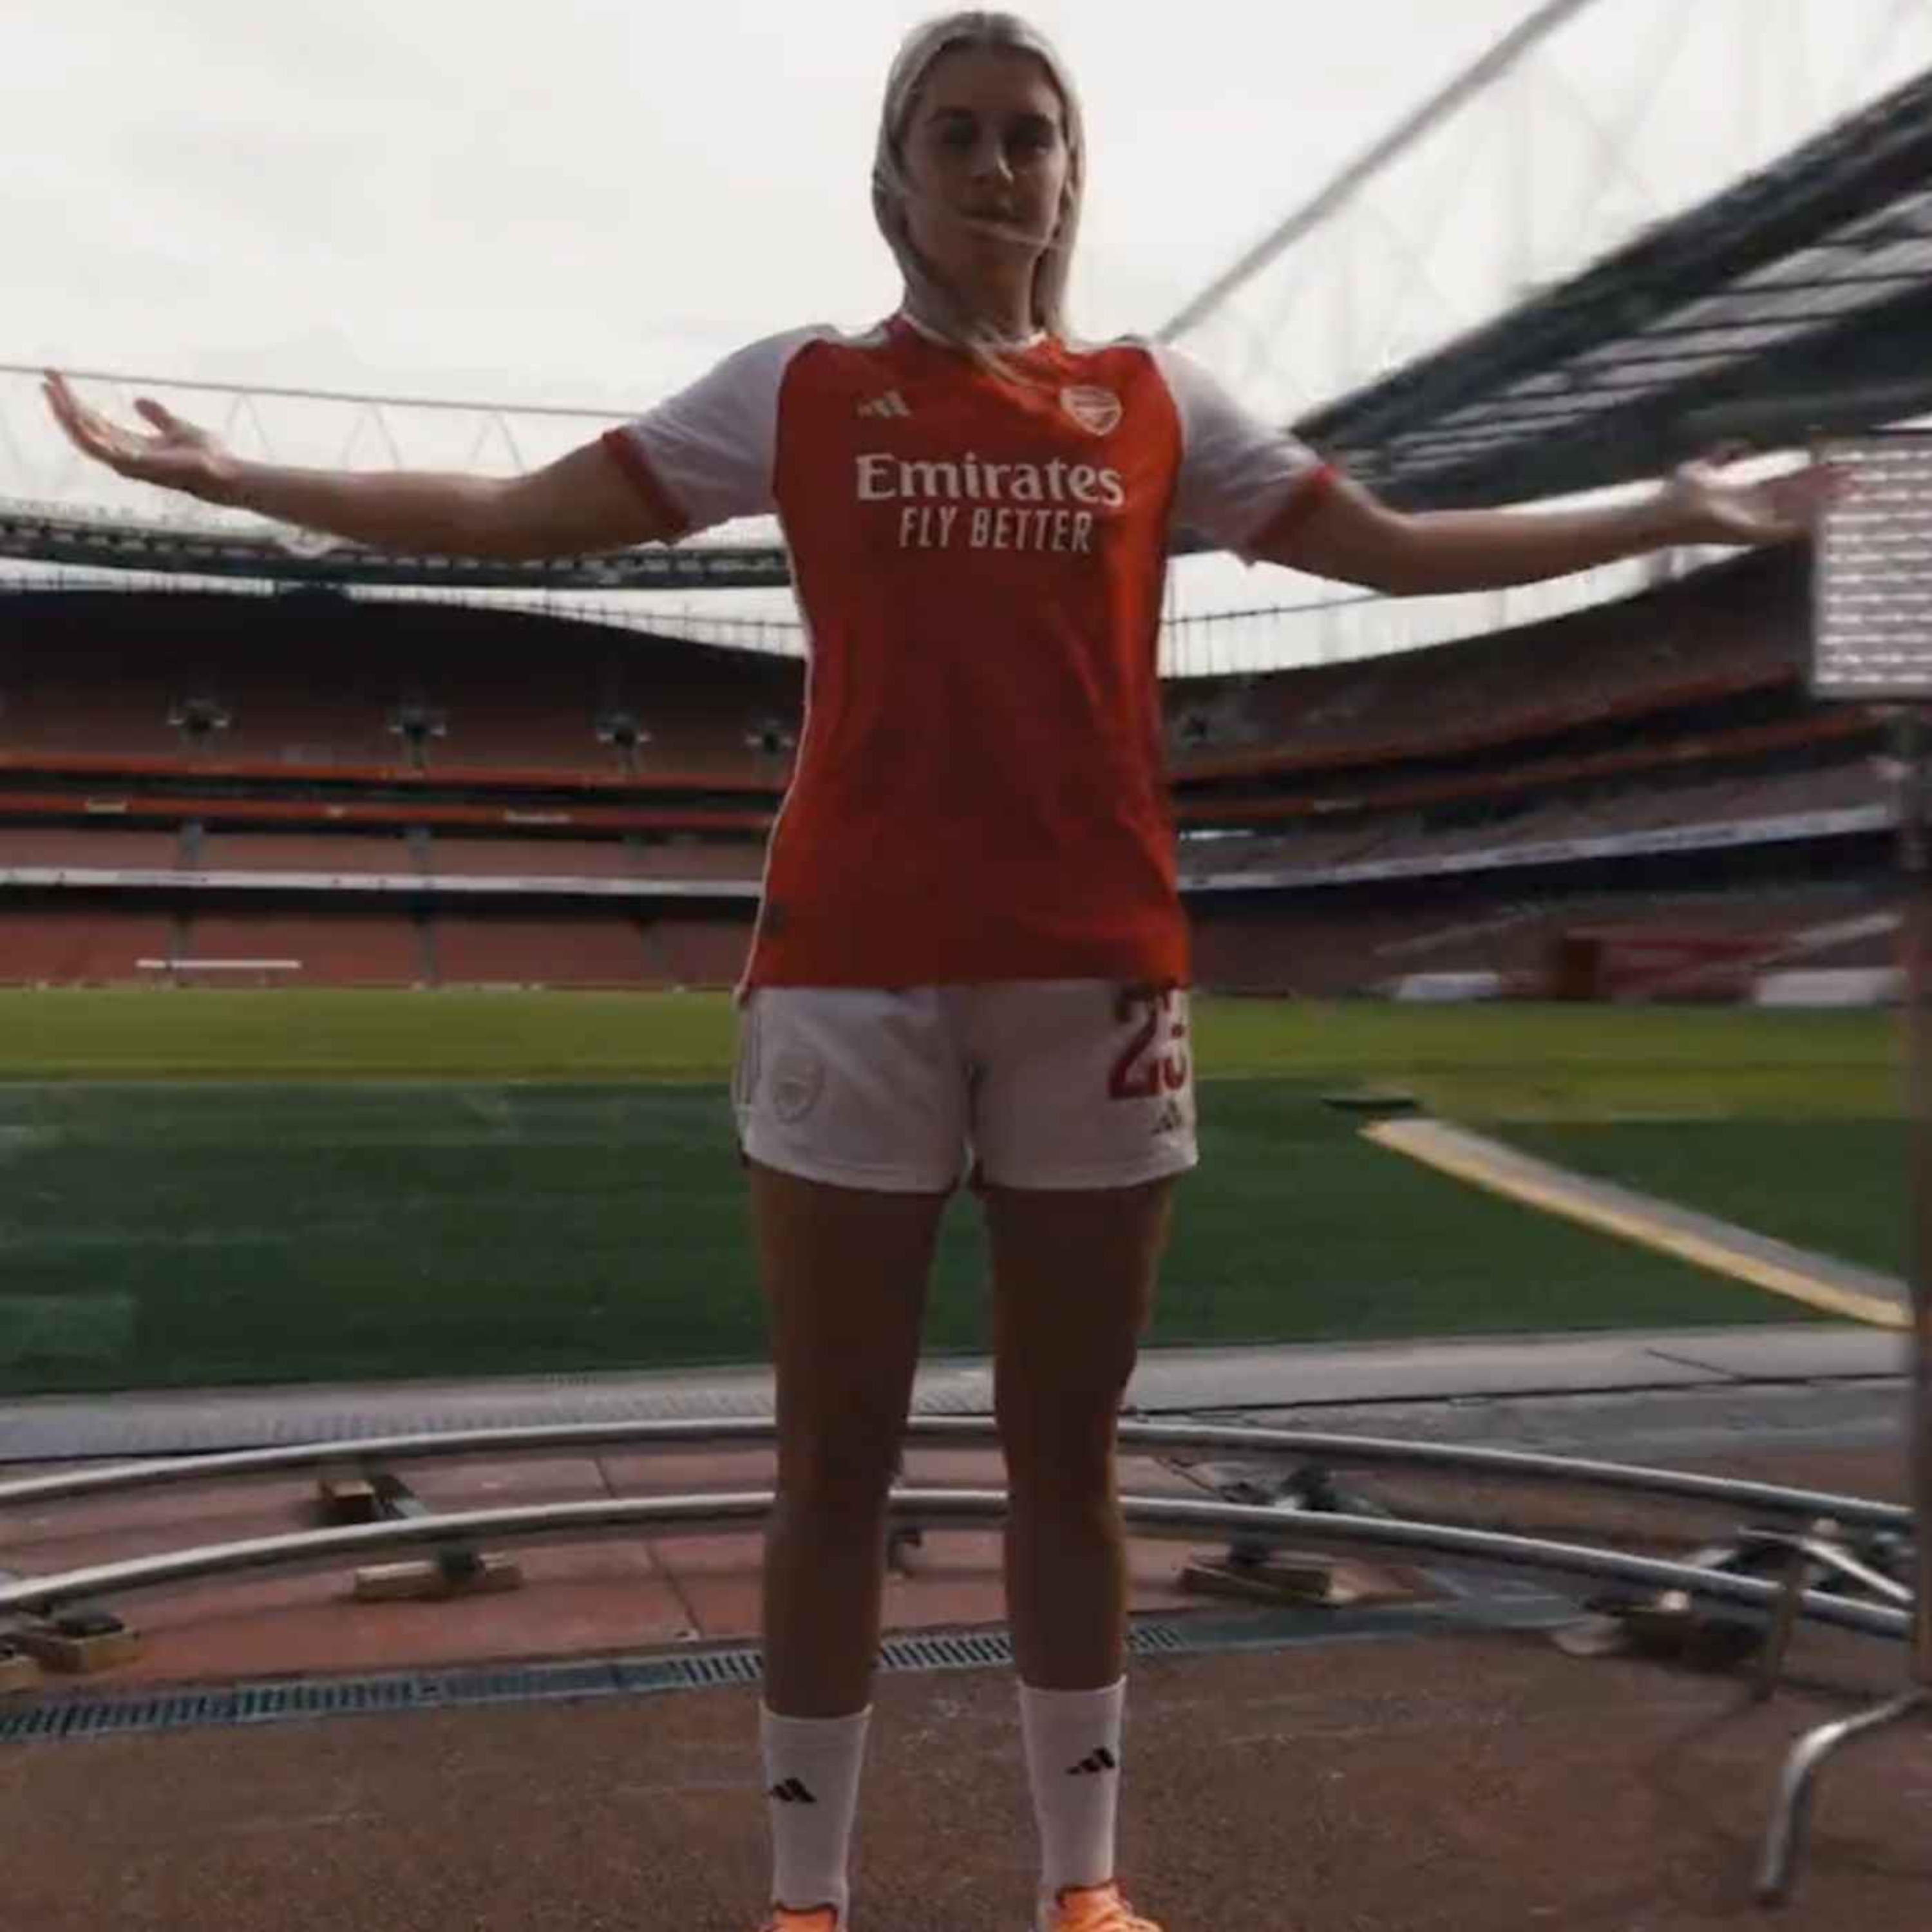 Episode 739 - Alessia Russo signs for Arsenal